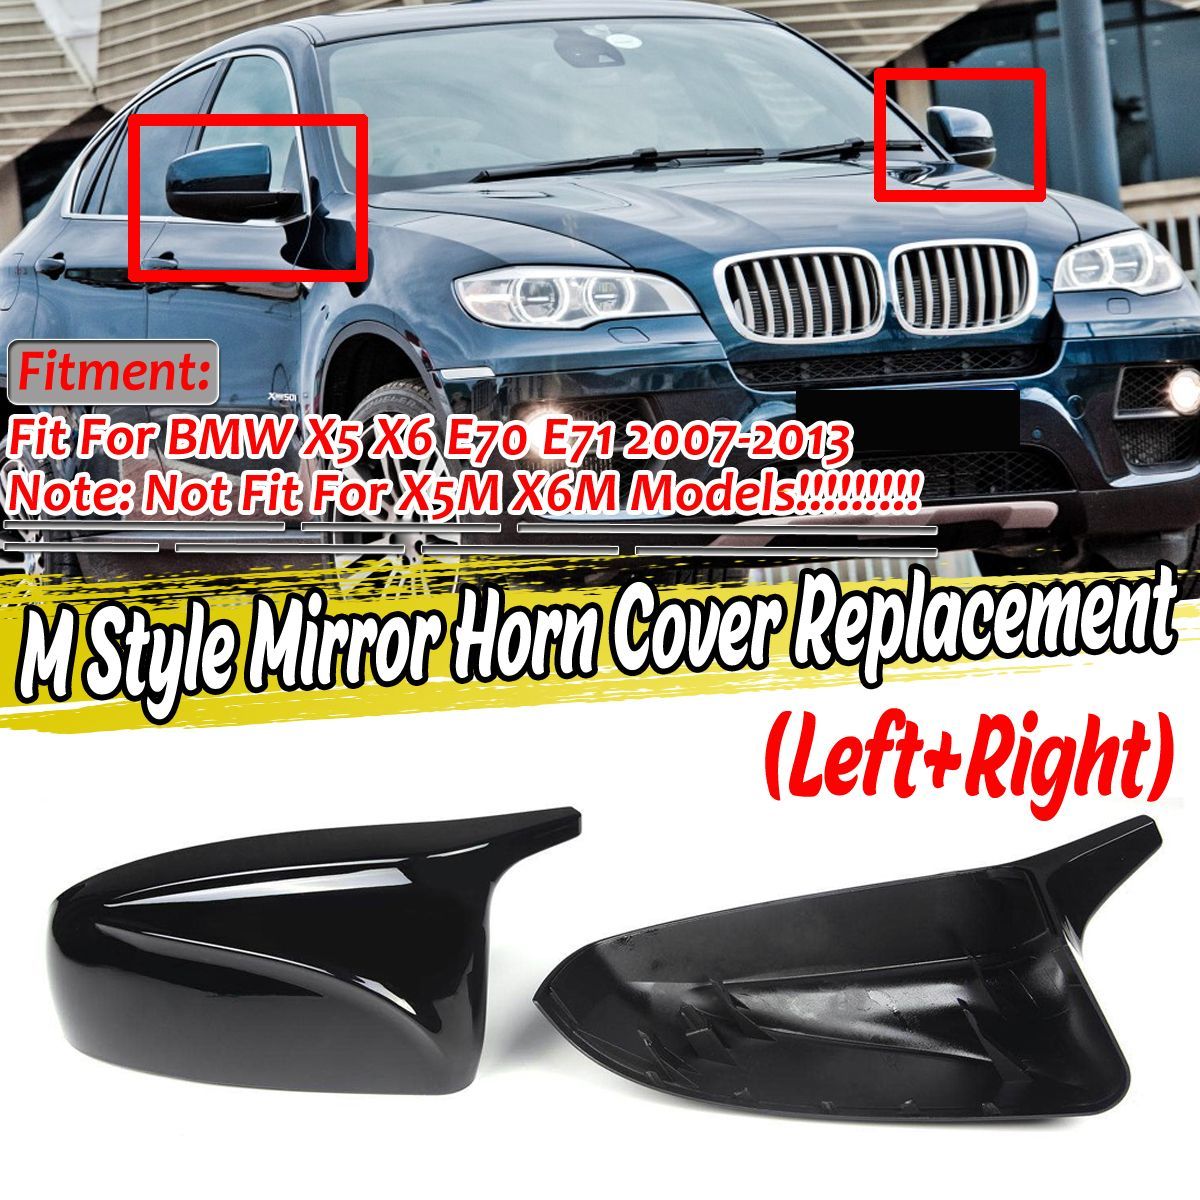 Glossy-Black-M-Style-Rear-View-Mirror-Cap-Cover-Replacement-Pair-For-BMW-X5-X6-E70-E71-2007-2013-1727293